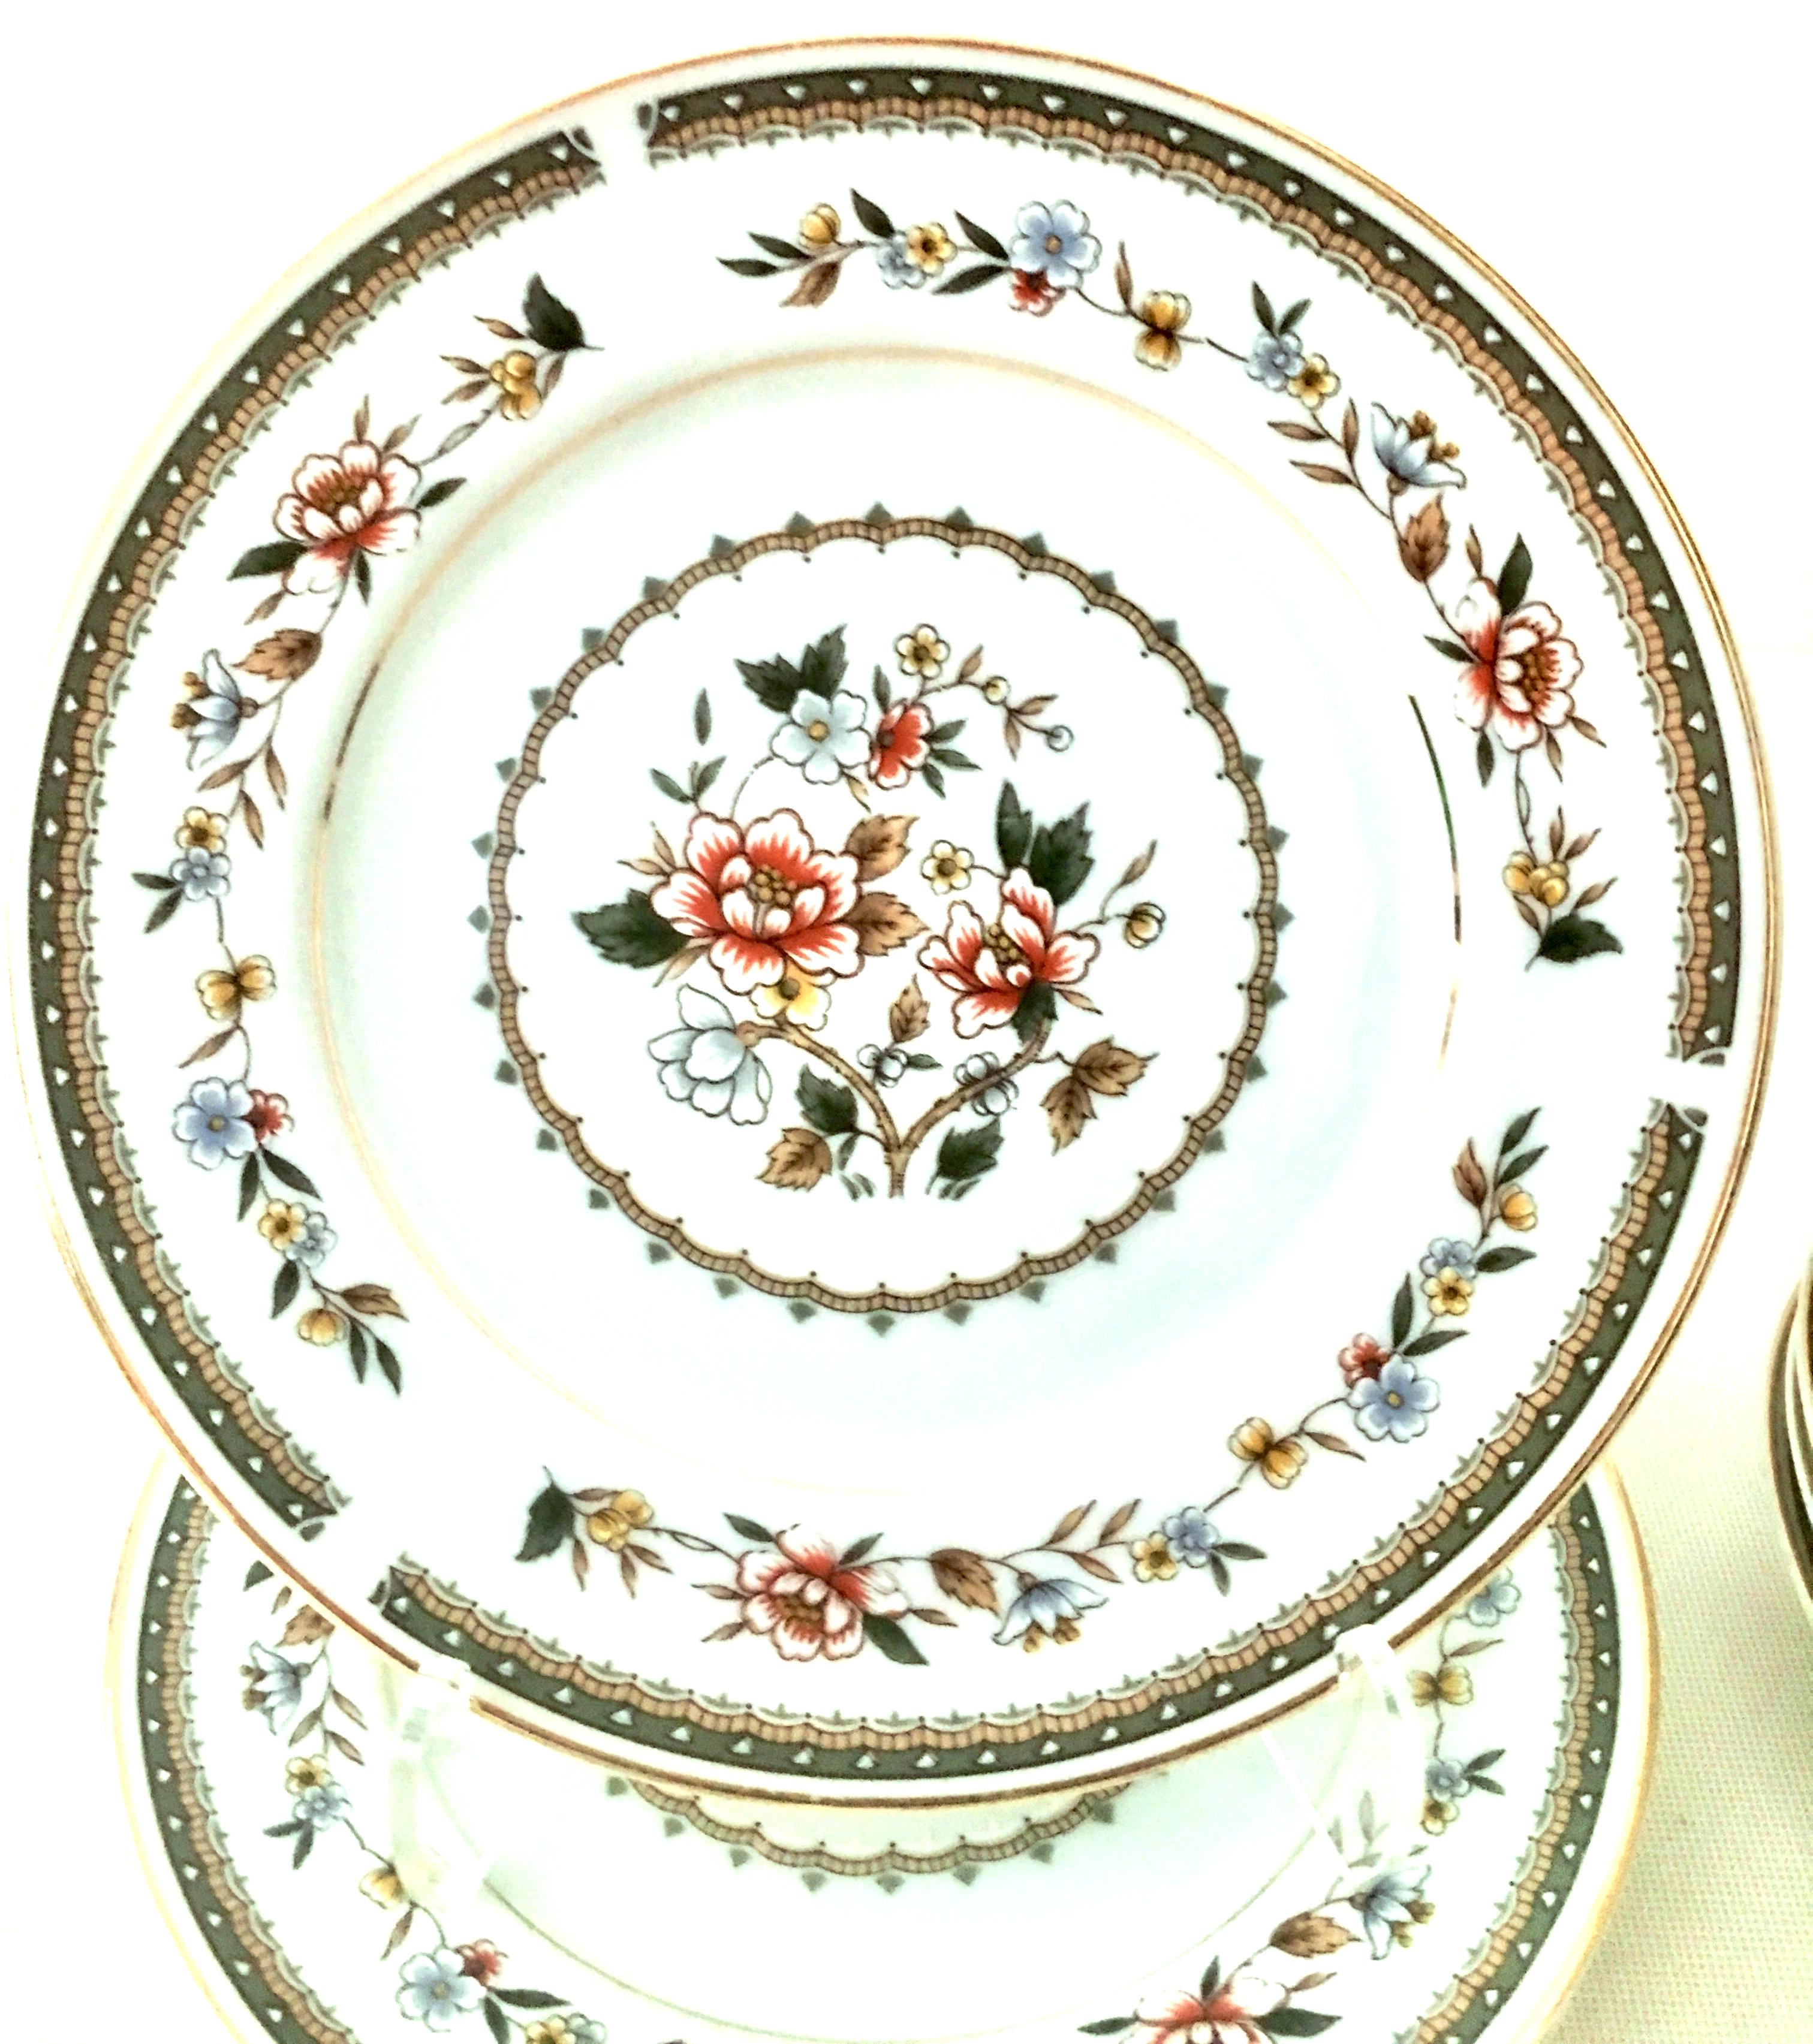 1960's Japanese Porcelain & 22K gold floral motif dinnerware S/13. Set features a bright white ground with 22-karat gold rim and center trim. A scattered floral pattern in khaki, rust, blue, green and yellow. Classic and timeless each piece is